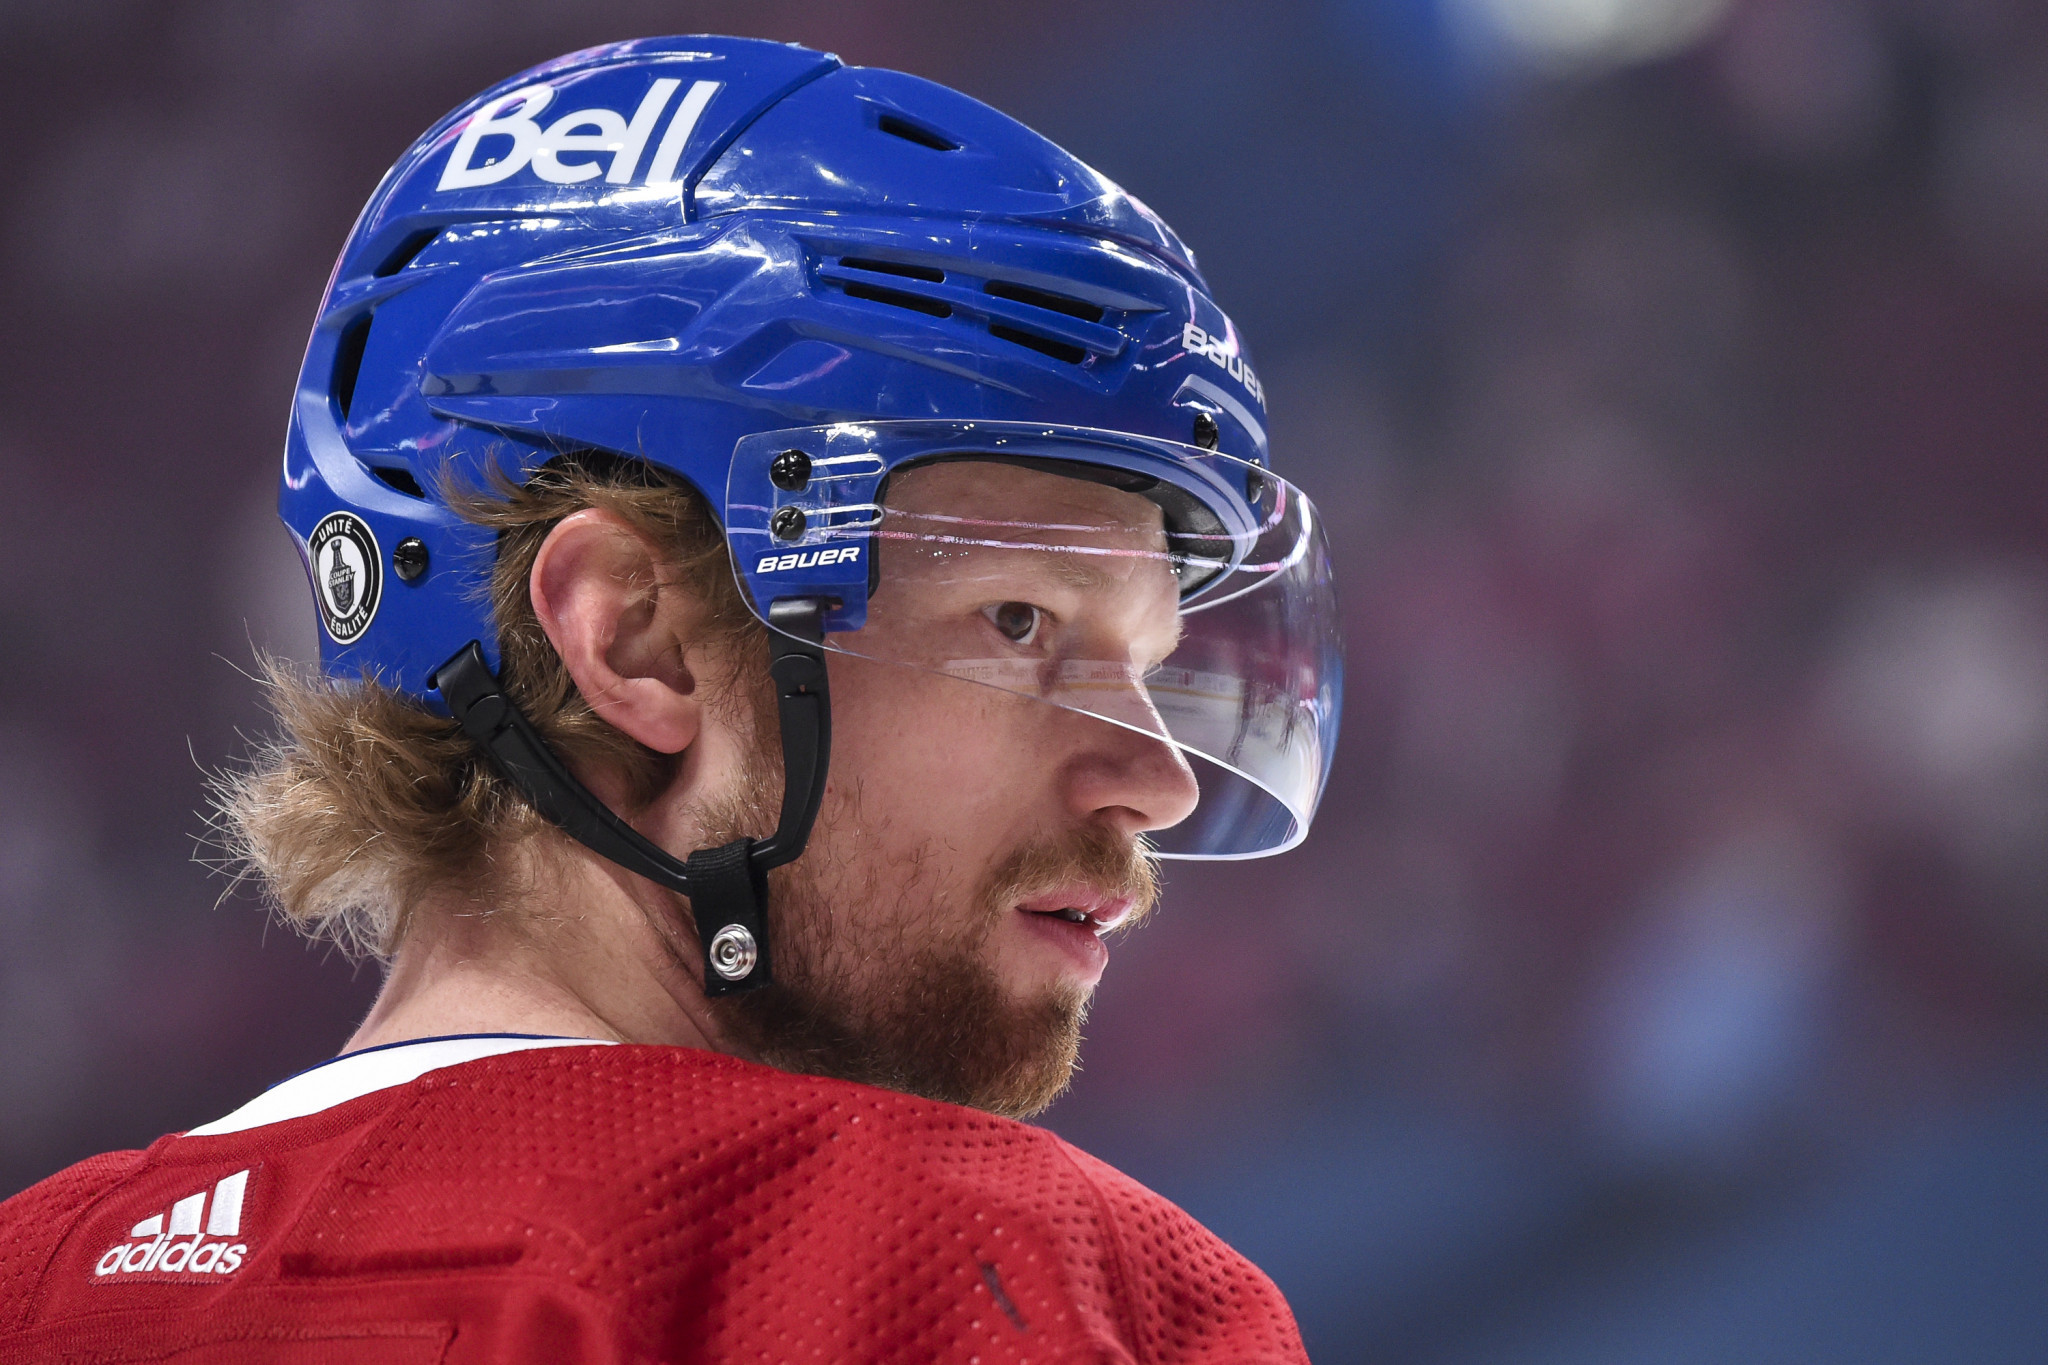 Staal named Canada's ice hockey captain for Beijing 2022